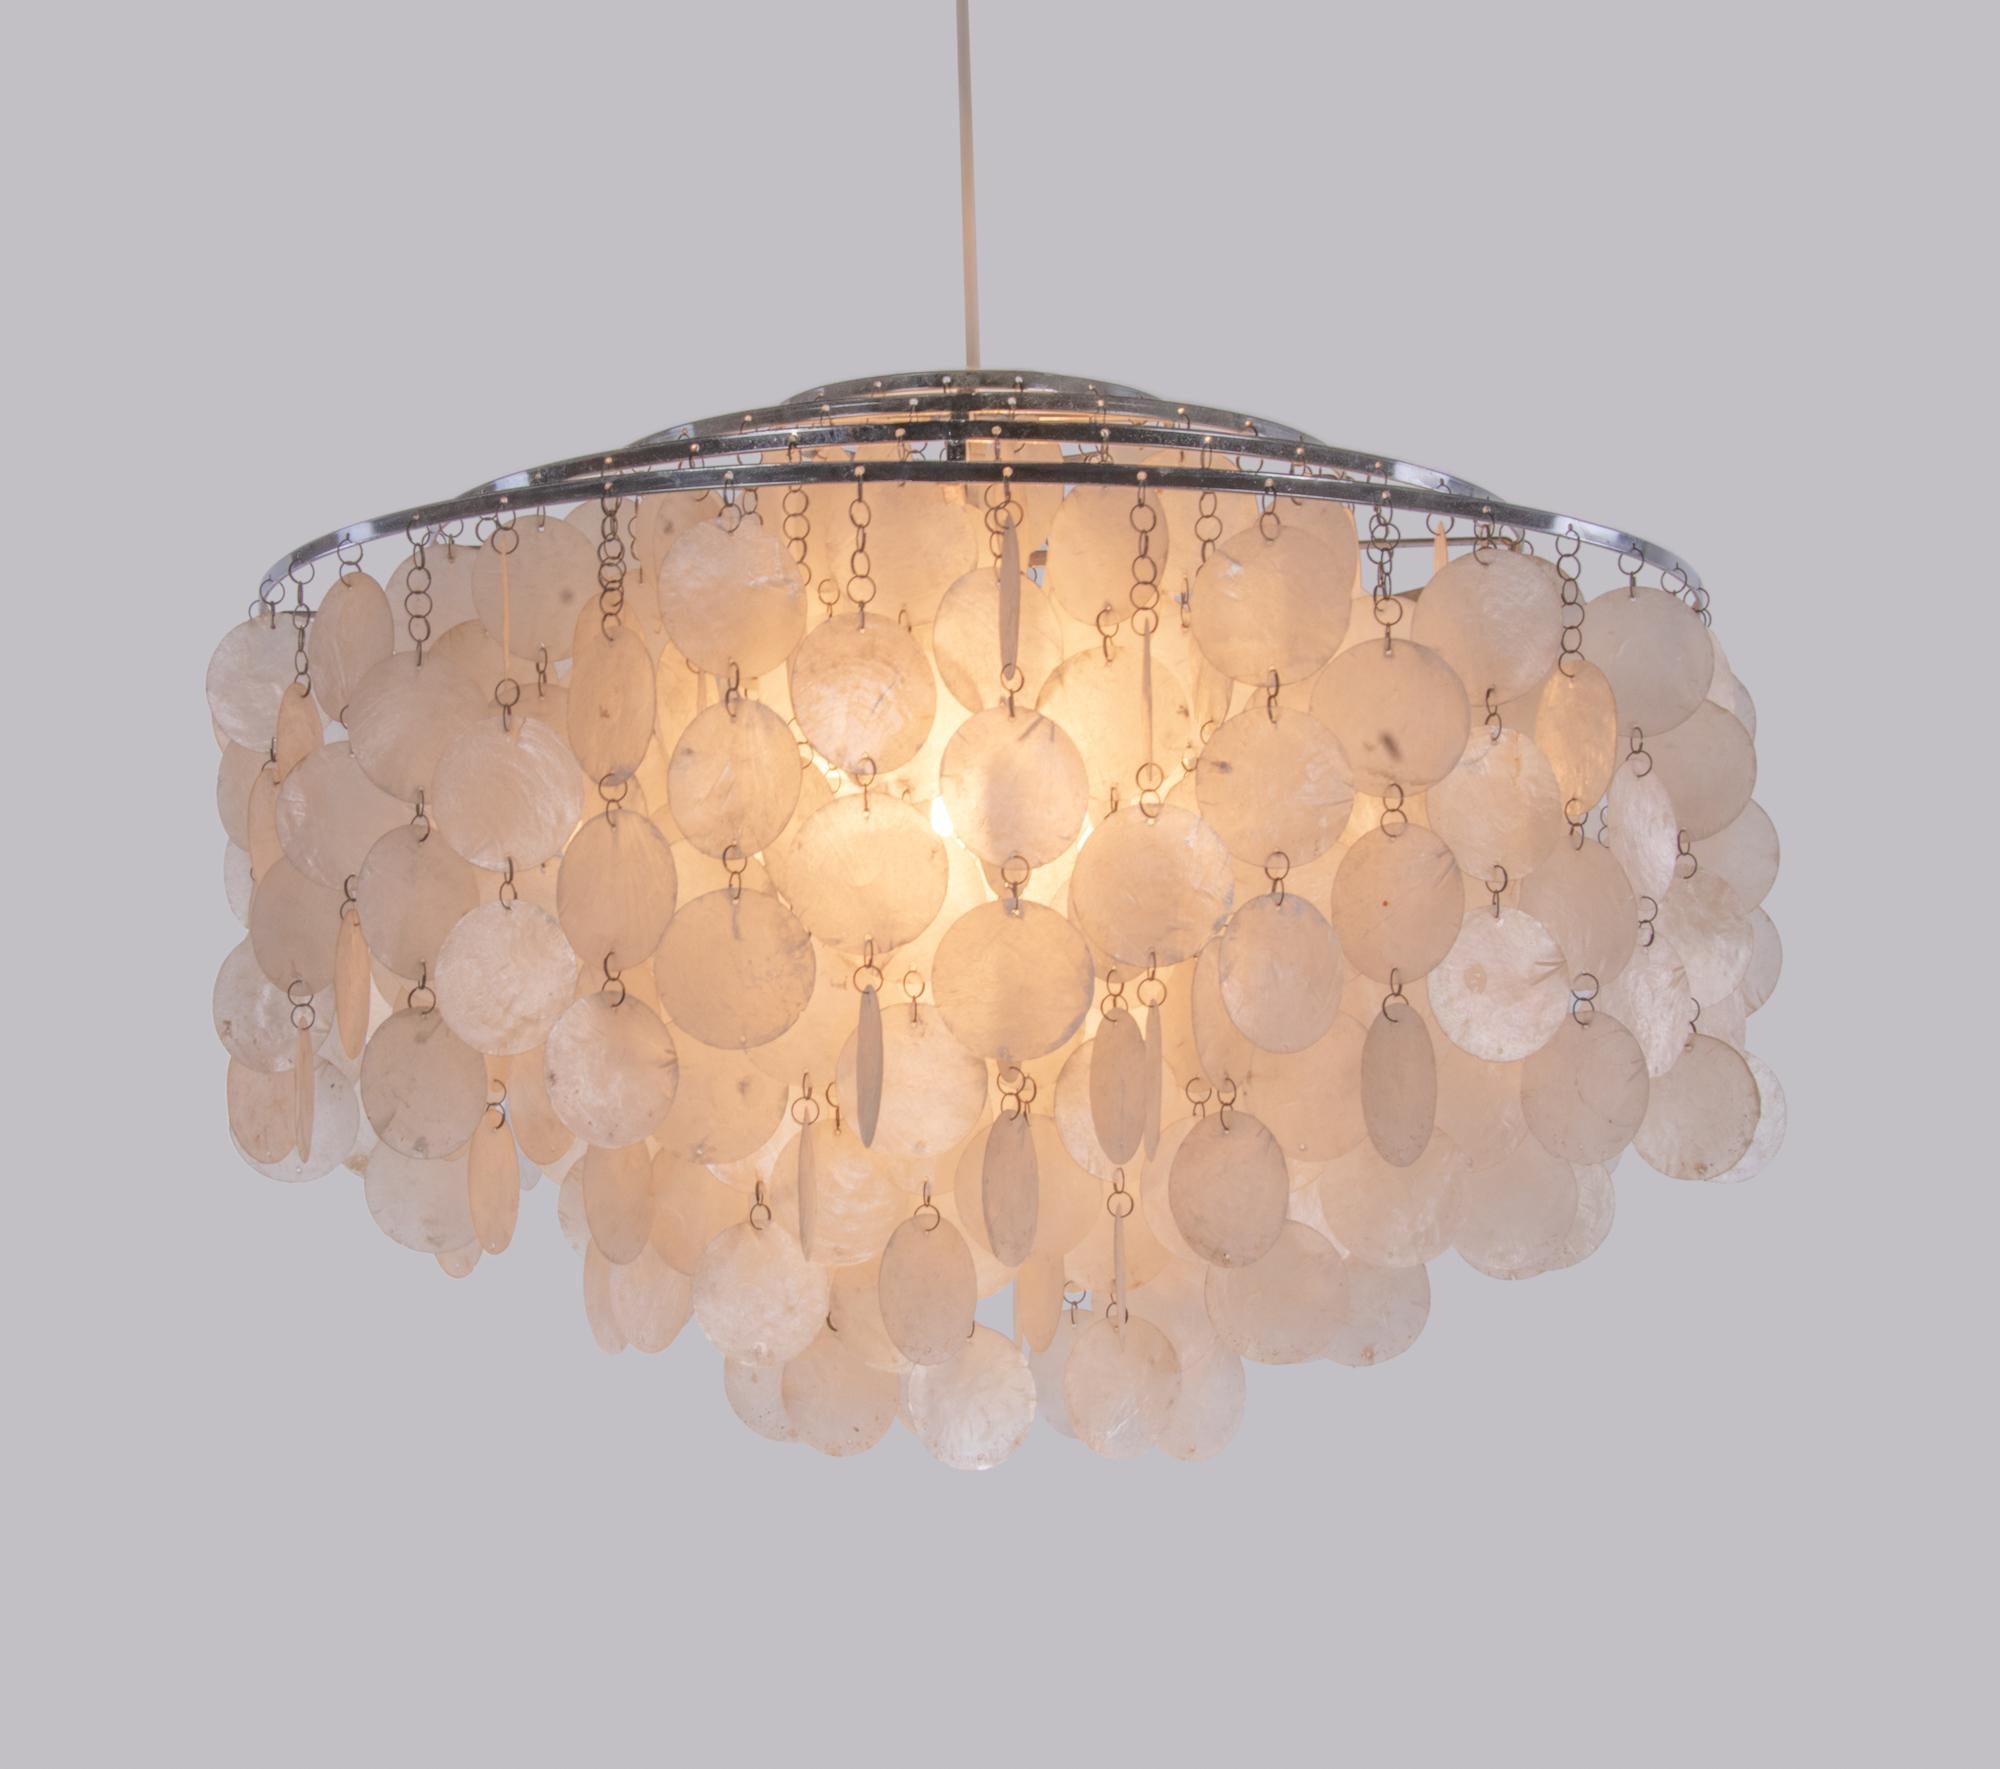 Mid-Century Modern '1 of 3' Fun Shell Chandelier by Verner Panton for J. Luber Ag, Switzerland 1964 For Sale